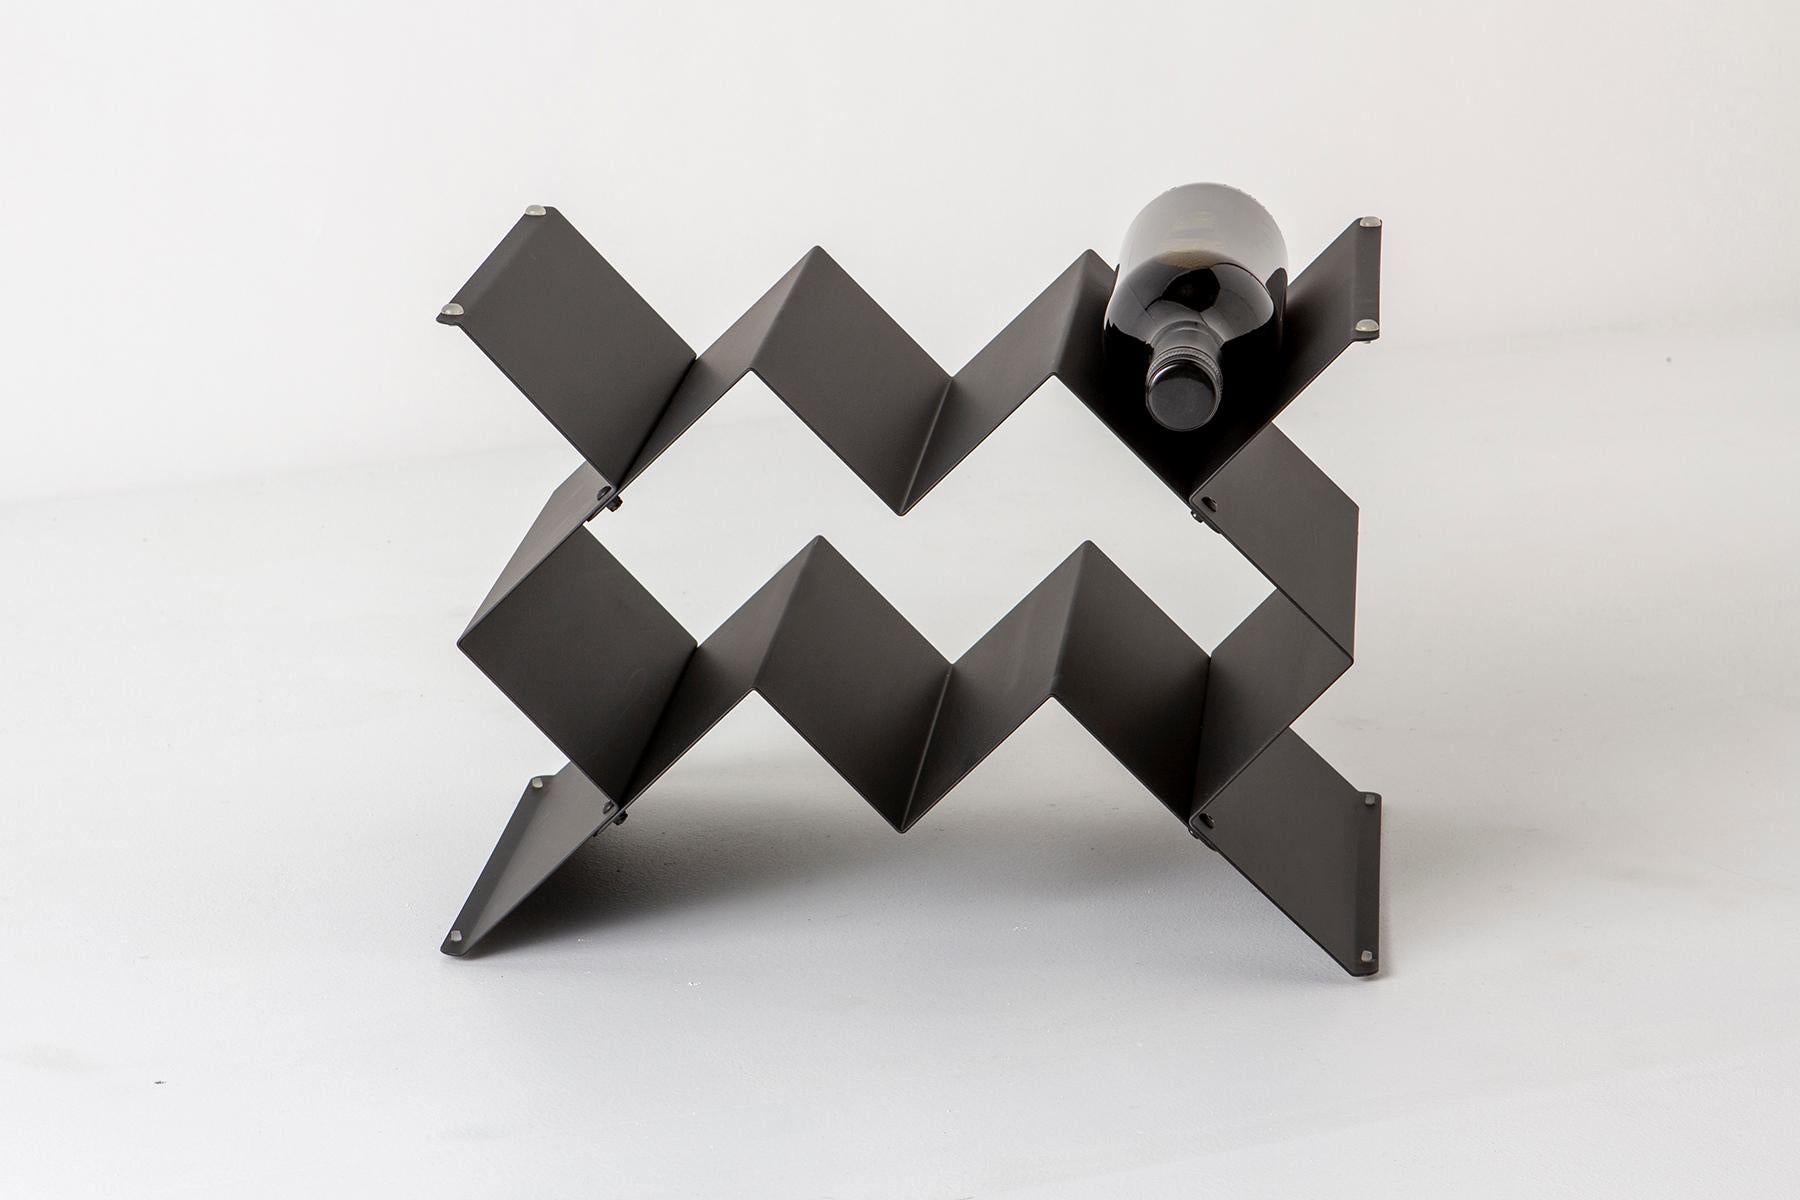 Fold wine rack is a Brutalist inspired modular design that can be stacked in a variety of sizes and configurations. Made from folded sheet metal with a powder-coated finish. The intention of the Fold collection is to express the purity of